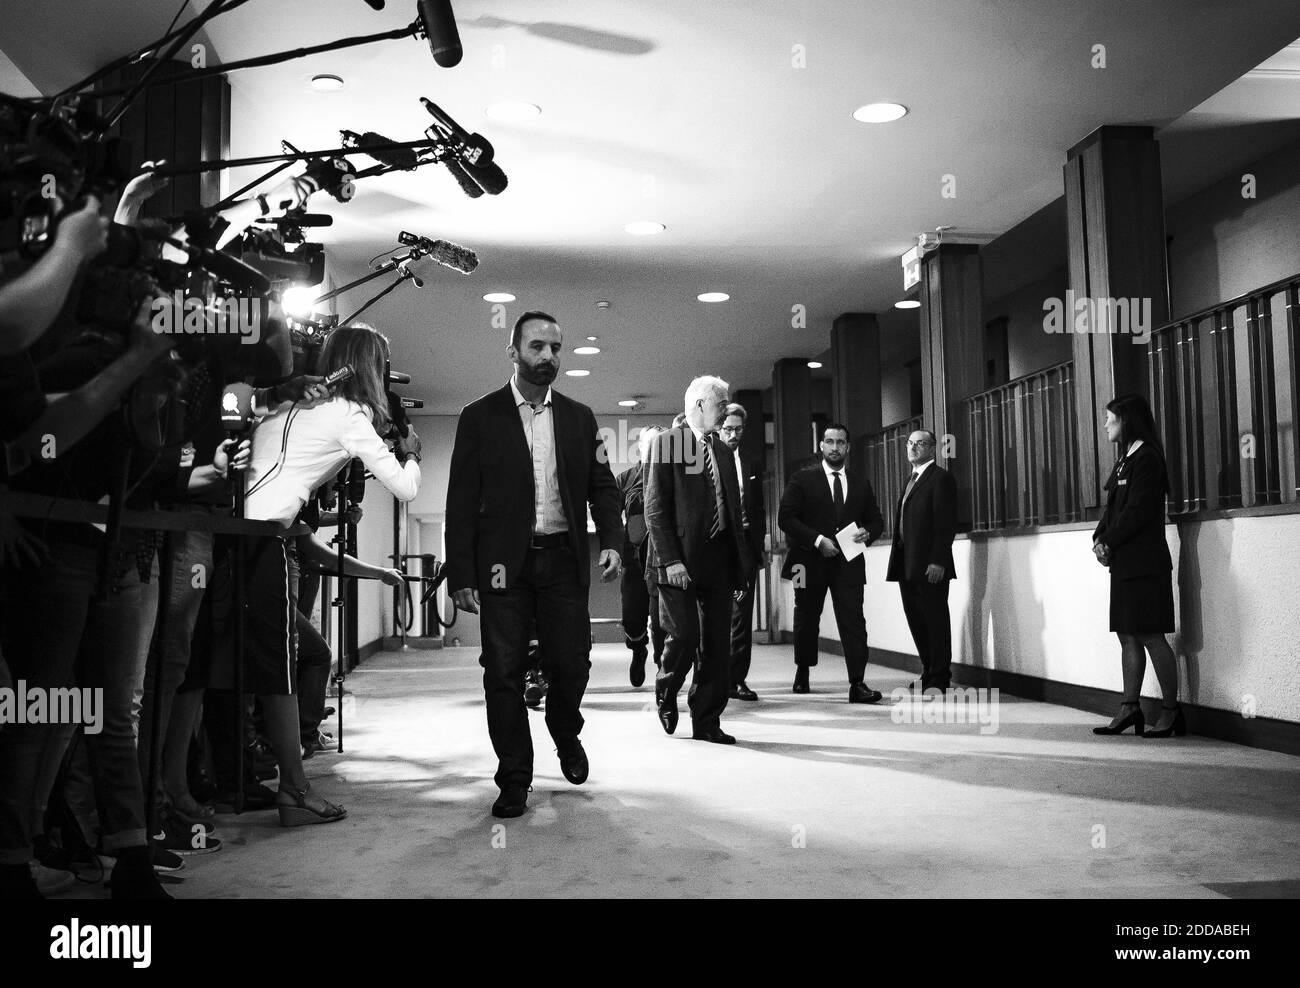 Former Elysee senior security officer Alexandre Benalla leaves in a media frenzy after his appearance before a Senate committee in Paris, France, on September 19, 2018. The disgraced former bodyguard at the centre of the biggest scandal of Emmanuel Macron's young presidency appeared before a Senate committee which will quiz him over his close ties to France's maverick leader. Benalla made global headlines in July after Le Monde newspaper revealed him as the man filmed roughing up demonstrators at a May Day rally in Paris, posing as a police officer with a police helmet and armband. Photo by El Stock Photo